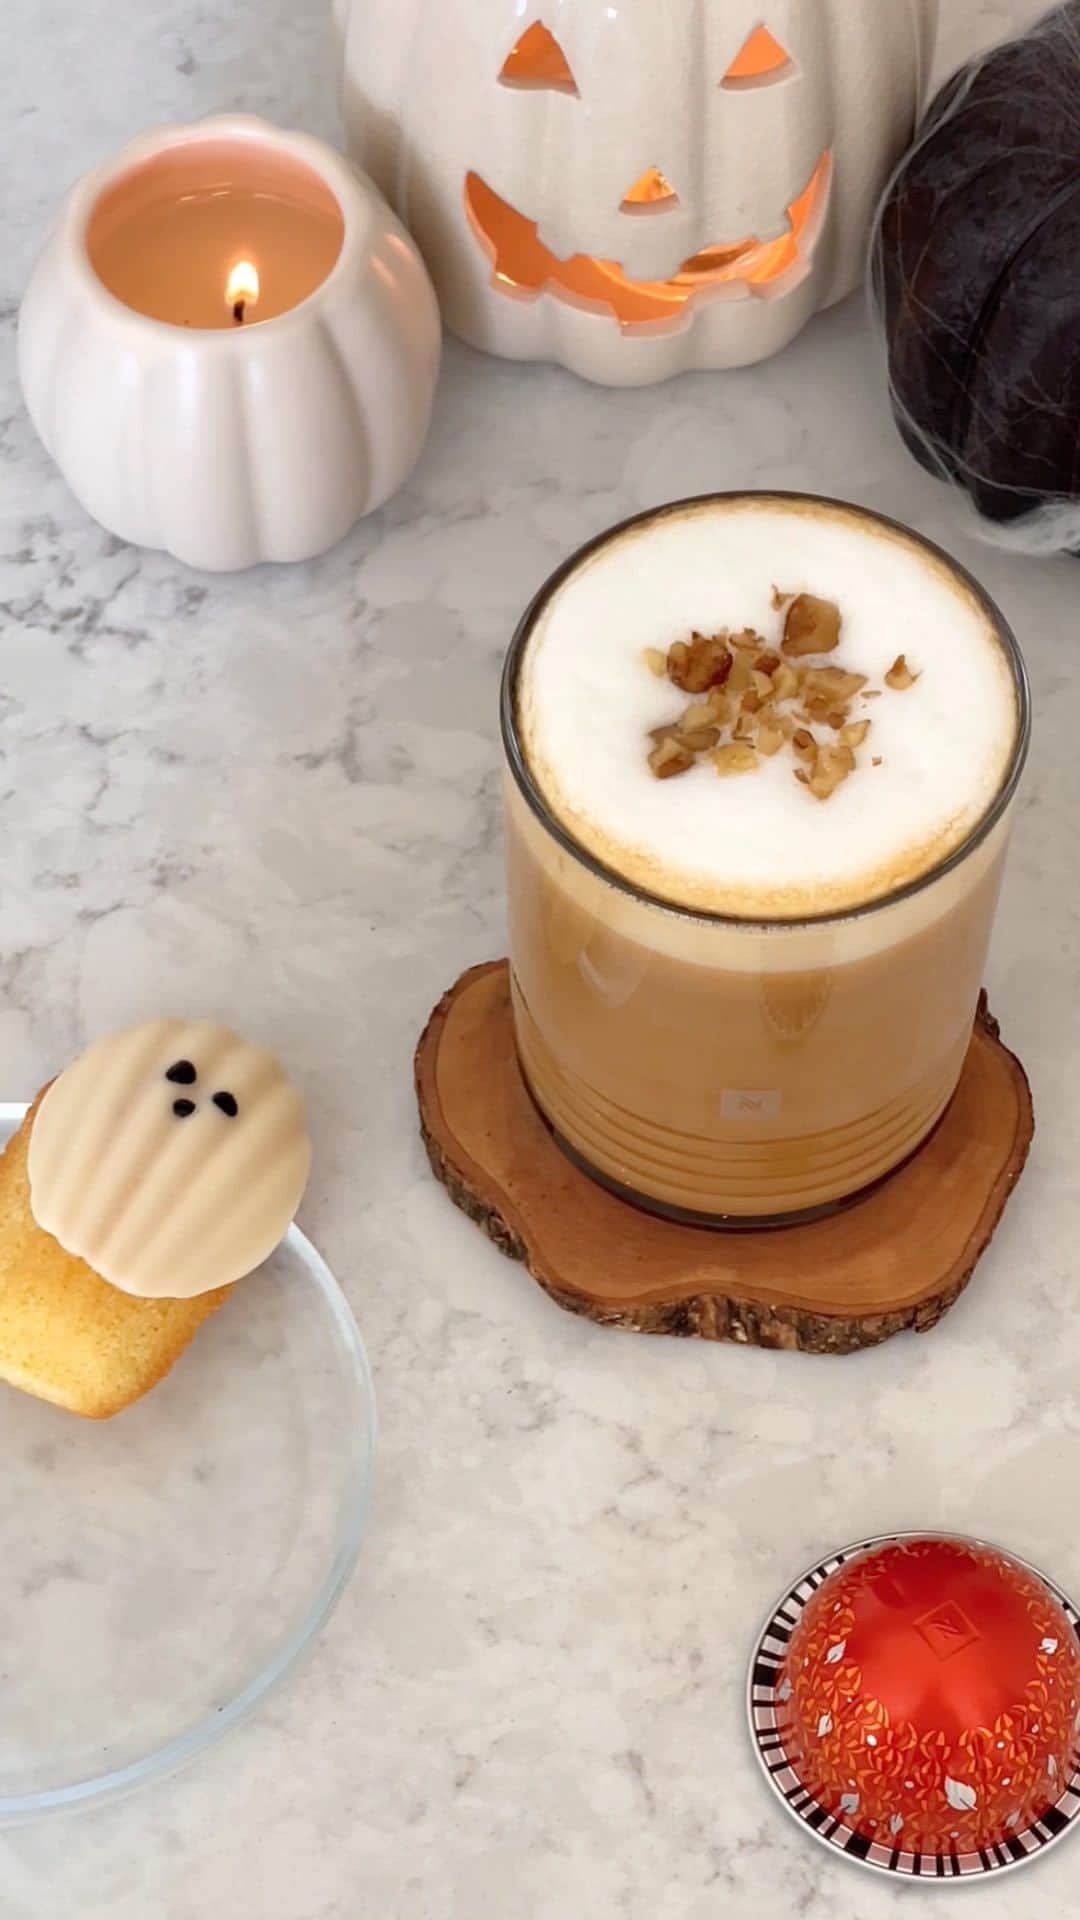 Nespressoのインスタグラム：「Get that cozy feeling right in your mug for Halloween 🎃 ☕️ with the iconic Pumpkin Spice Carrot Latte Coffee made by @_yu.jung   Here’s what you will need : •	230 ml Pumpkin Spice Coffee •	15 ml Maple Syrup •	70 ml Carrot Juice  •	100ml of Milk •	5 gr Crushed Walnuts  •	Vertuo Pop  •	Vertuo Small Recipe Glass  •	Barista Milk Device   How to make it :   1)In a jug, extract 80ml of 230ml Vertuo Pumpkin spice Coffee, using double click (it becomes turquoise light). 2) Pour 100 ml of milk directly into the Nespresso Barista device. Close the lid, select the “Latte Macchiato” recipe on the device and press the start button.  3) In a Vertuo Small recipe glass, pour 70l of carrot juice and 10ml of maple syrup. Stir Well.  4) Pour gently with a help of the tall spoon, the 80ml of Pumpkin spice coffee. 5) Pour gently the hot milk foam over it again with the help of the tall spoon. 6) Display some crushed Walnuts on top and add drizzle some Maple syrup over it.  #NespressoCoffeeCurious  #NespressoRecipes #PumpkinSeason #Halloween」